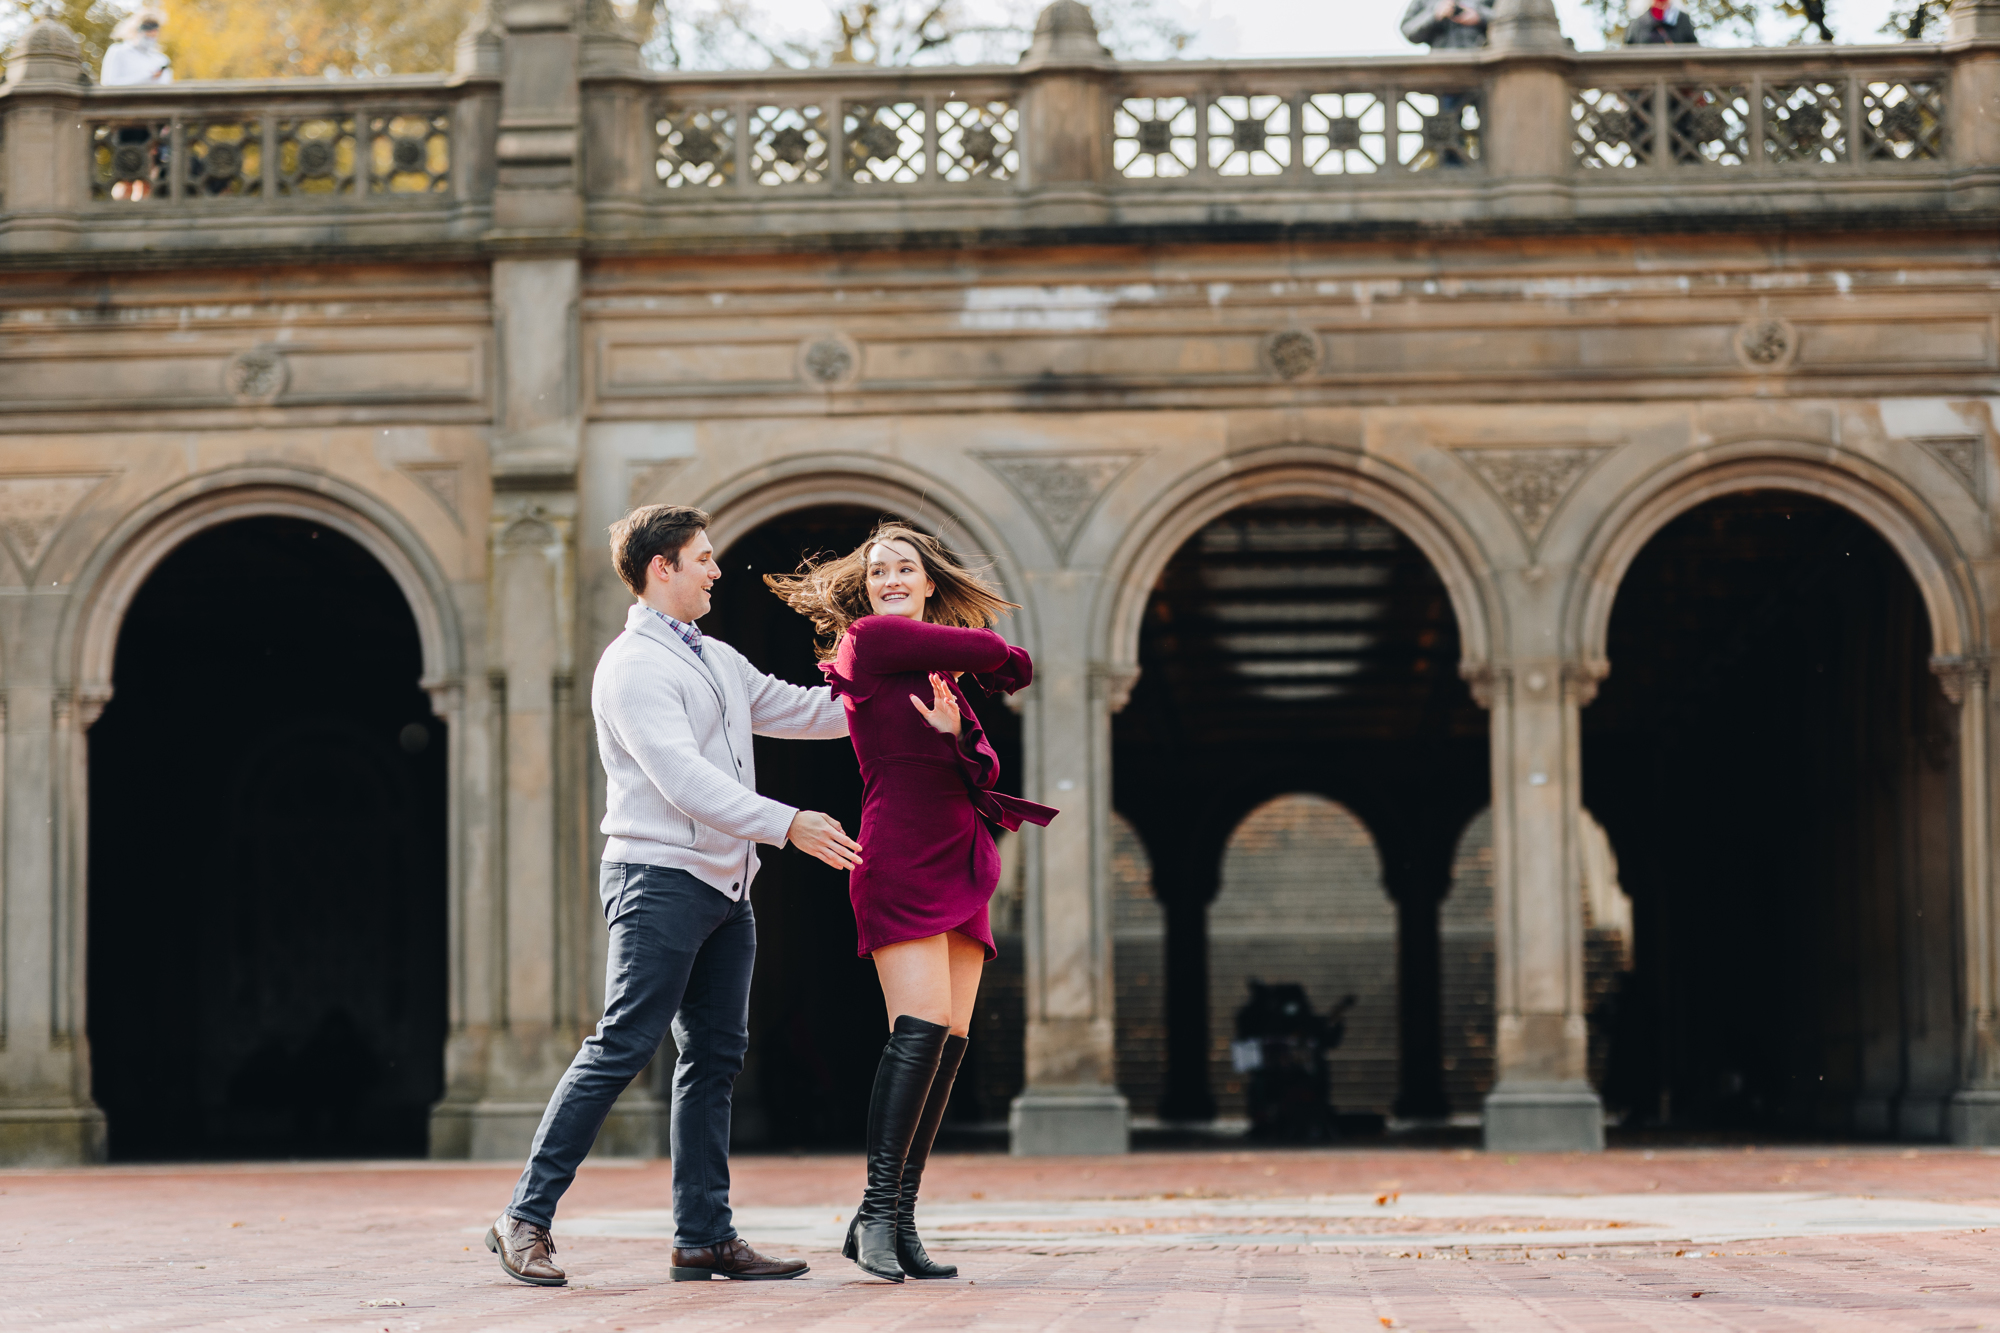 Lively Fall Engagement Photos in Central Park New York